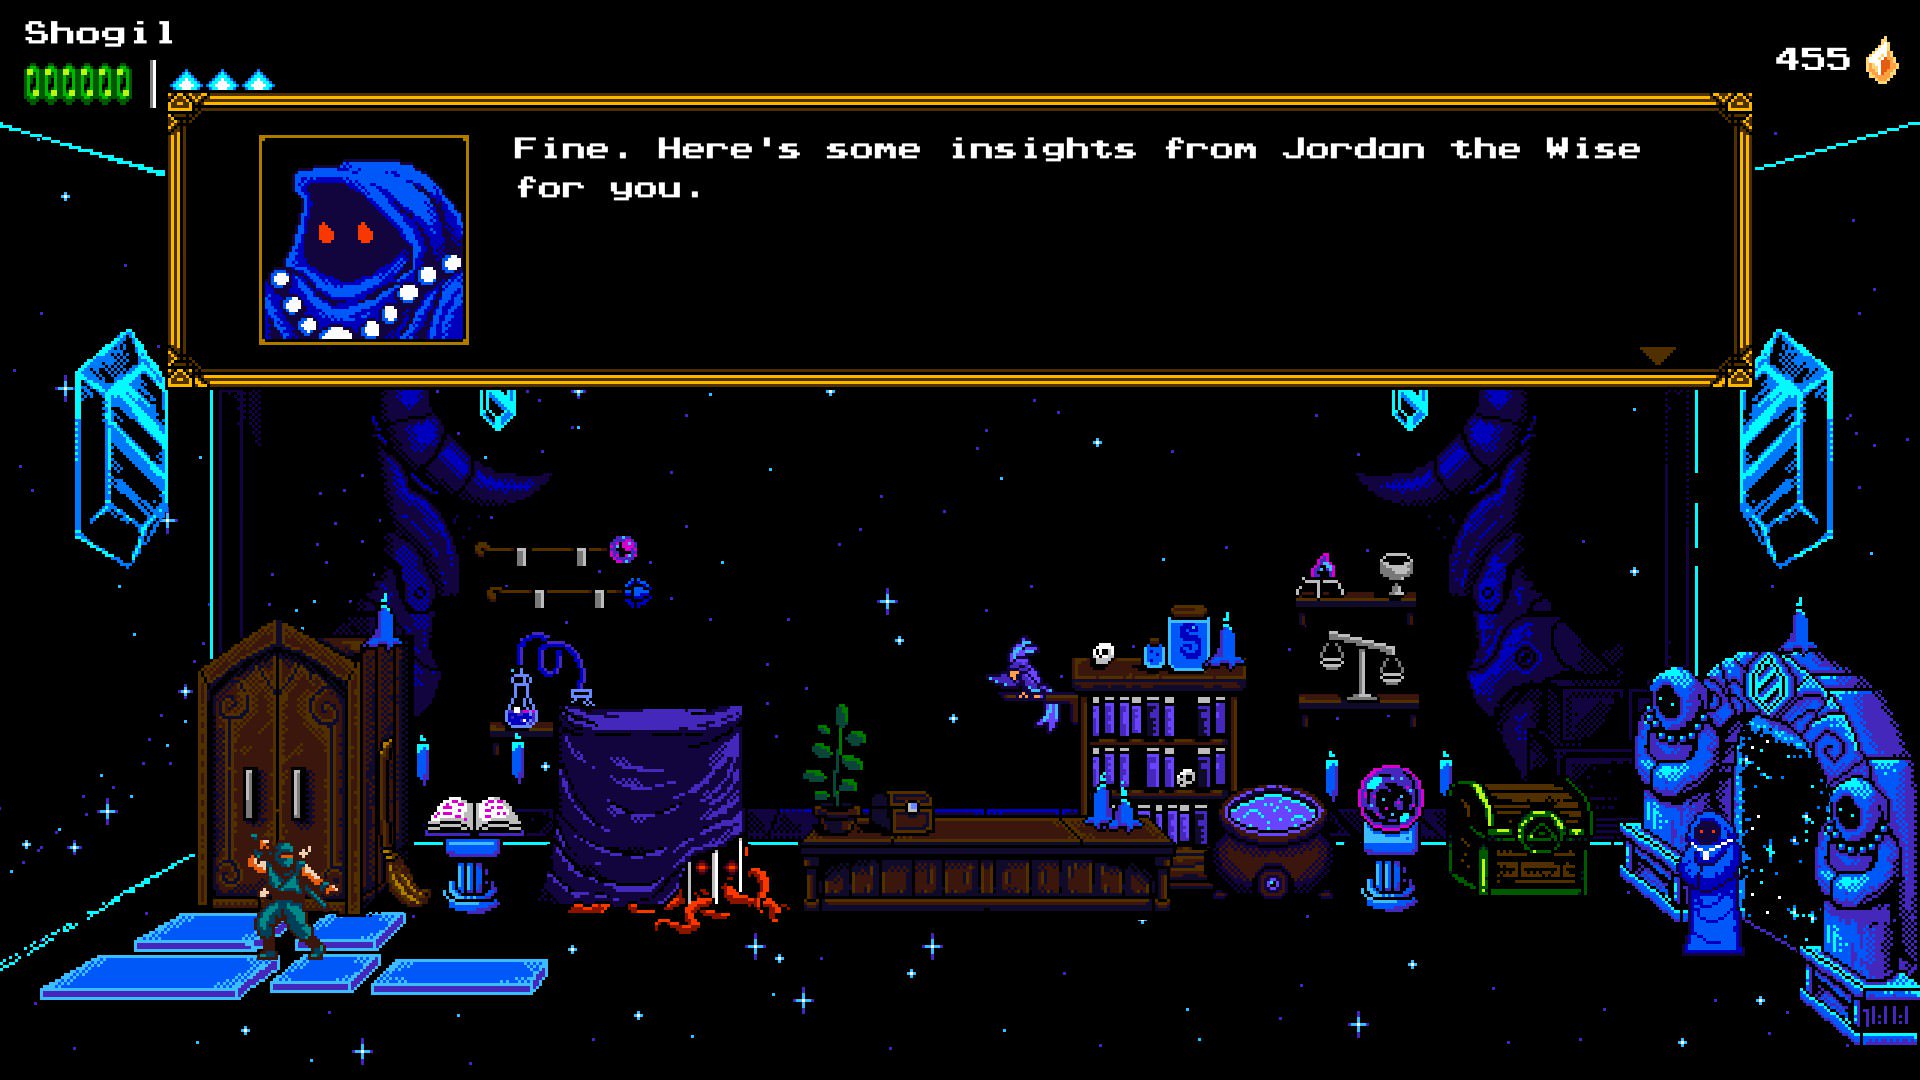 The Messenger prequel Sea of Stars funded in less than 7 hours